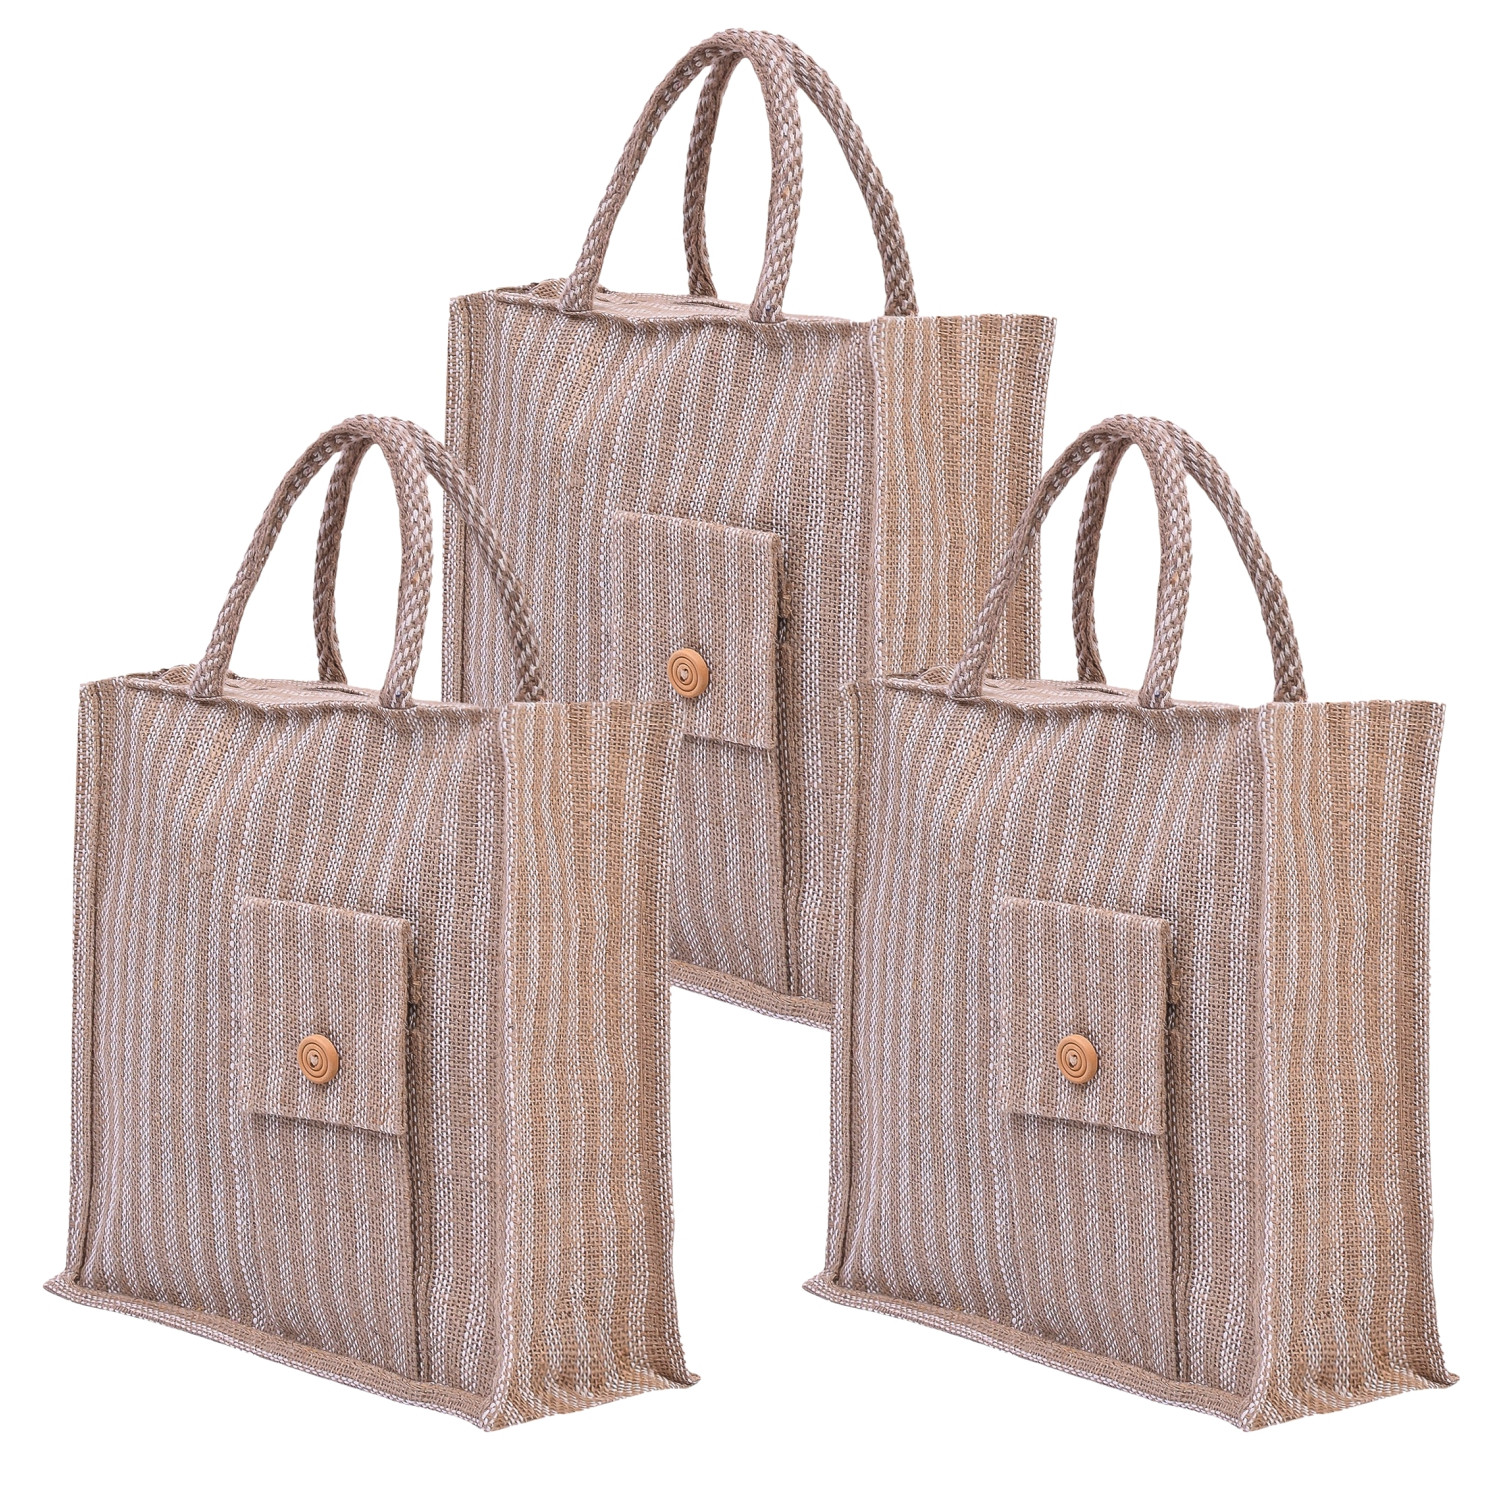 Kuber Industries Grocery Bag | Jute Carry Bag | Lunch Bags for Office | Zipper Grocery Bag with Handle | Vegetable Bag | Lining Front Pocket Shopping Bag | Medium | Brown